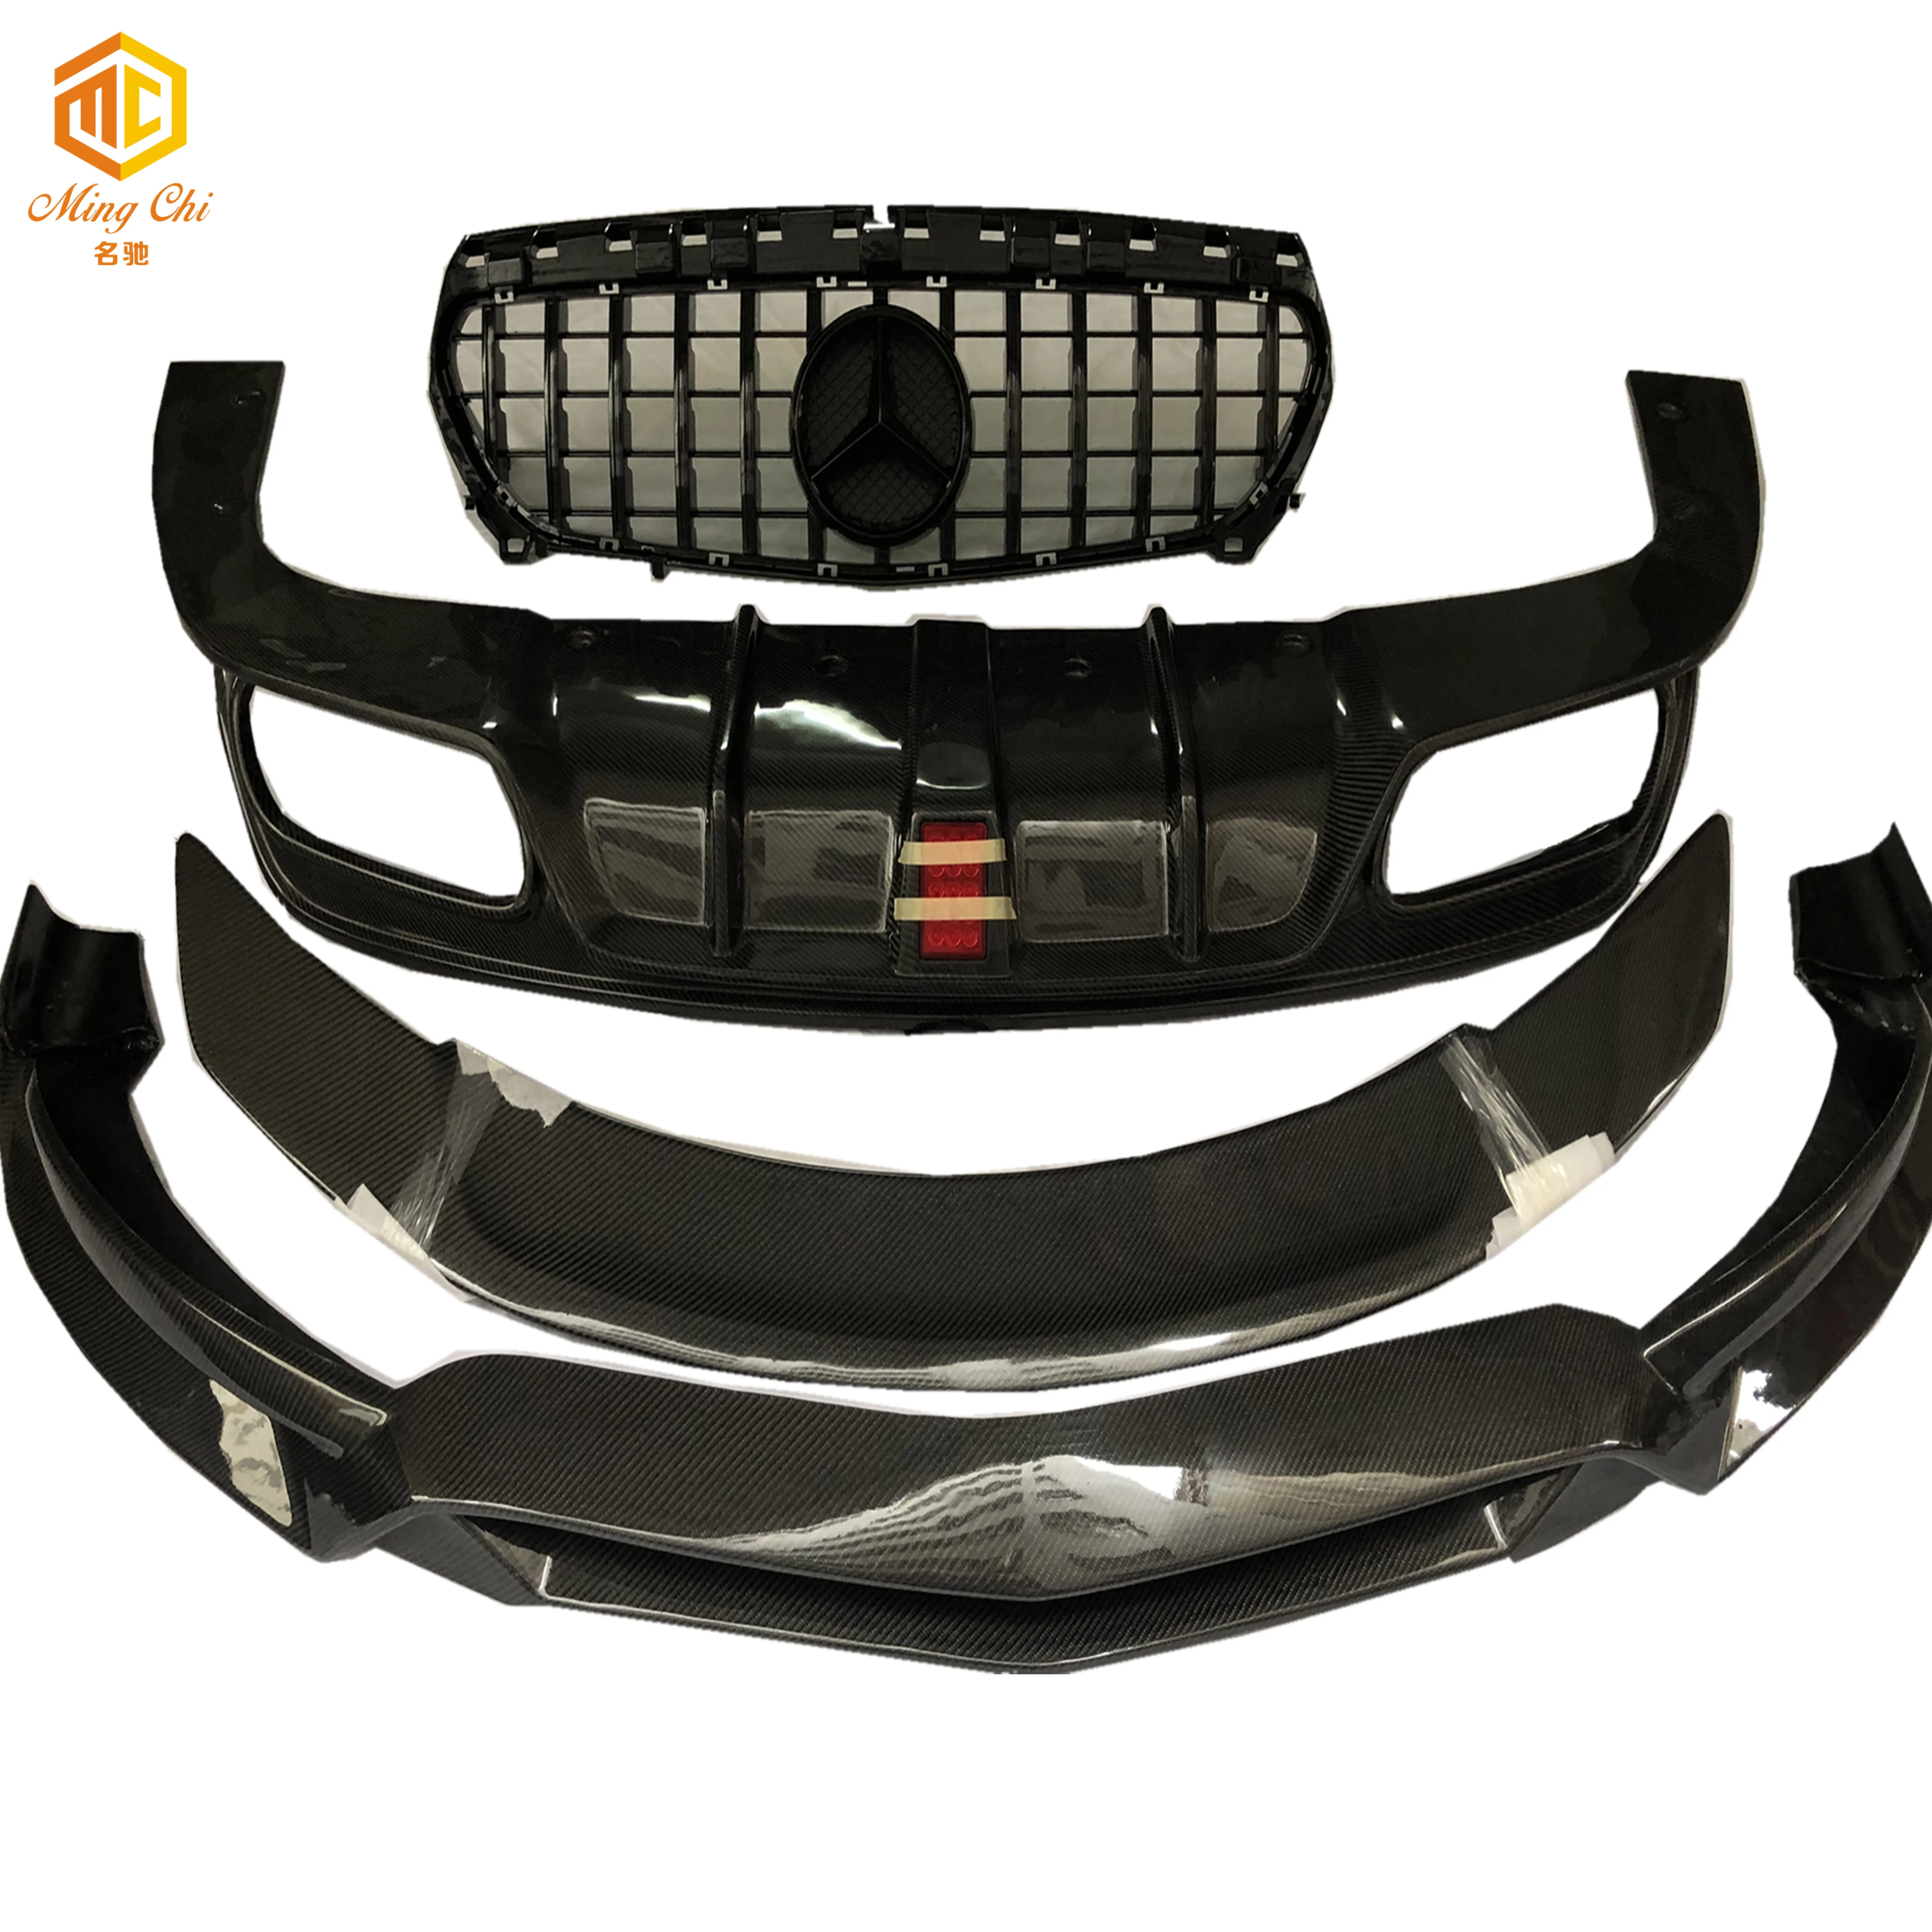 

R1LED Style carbon body kit for Mercedes Benz cla45 AMG CLA200 CLA250 class w117 front lip rear diffuser side skirts grille spo